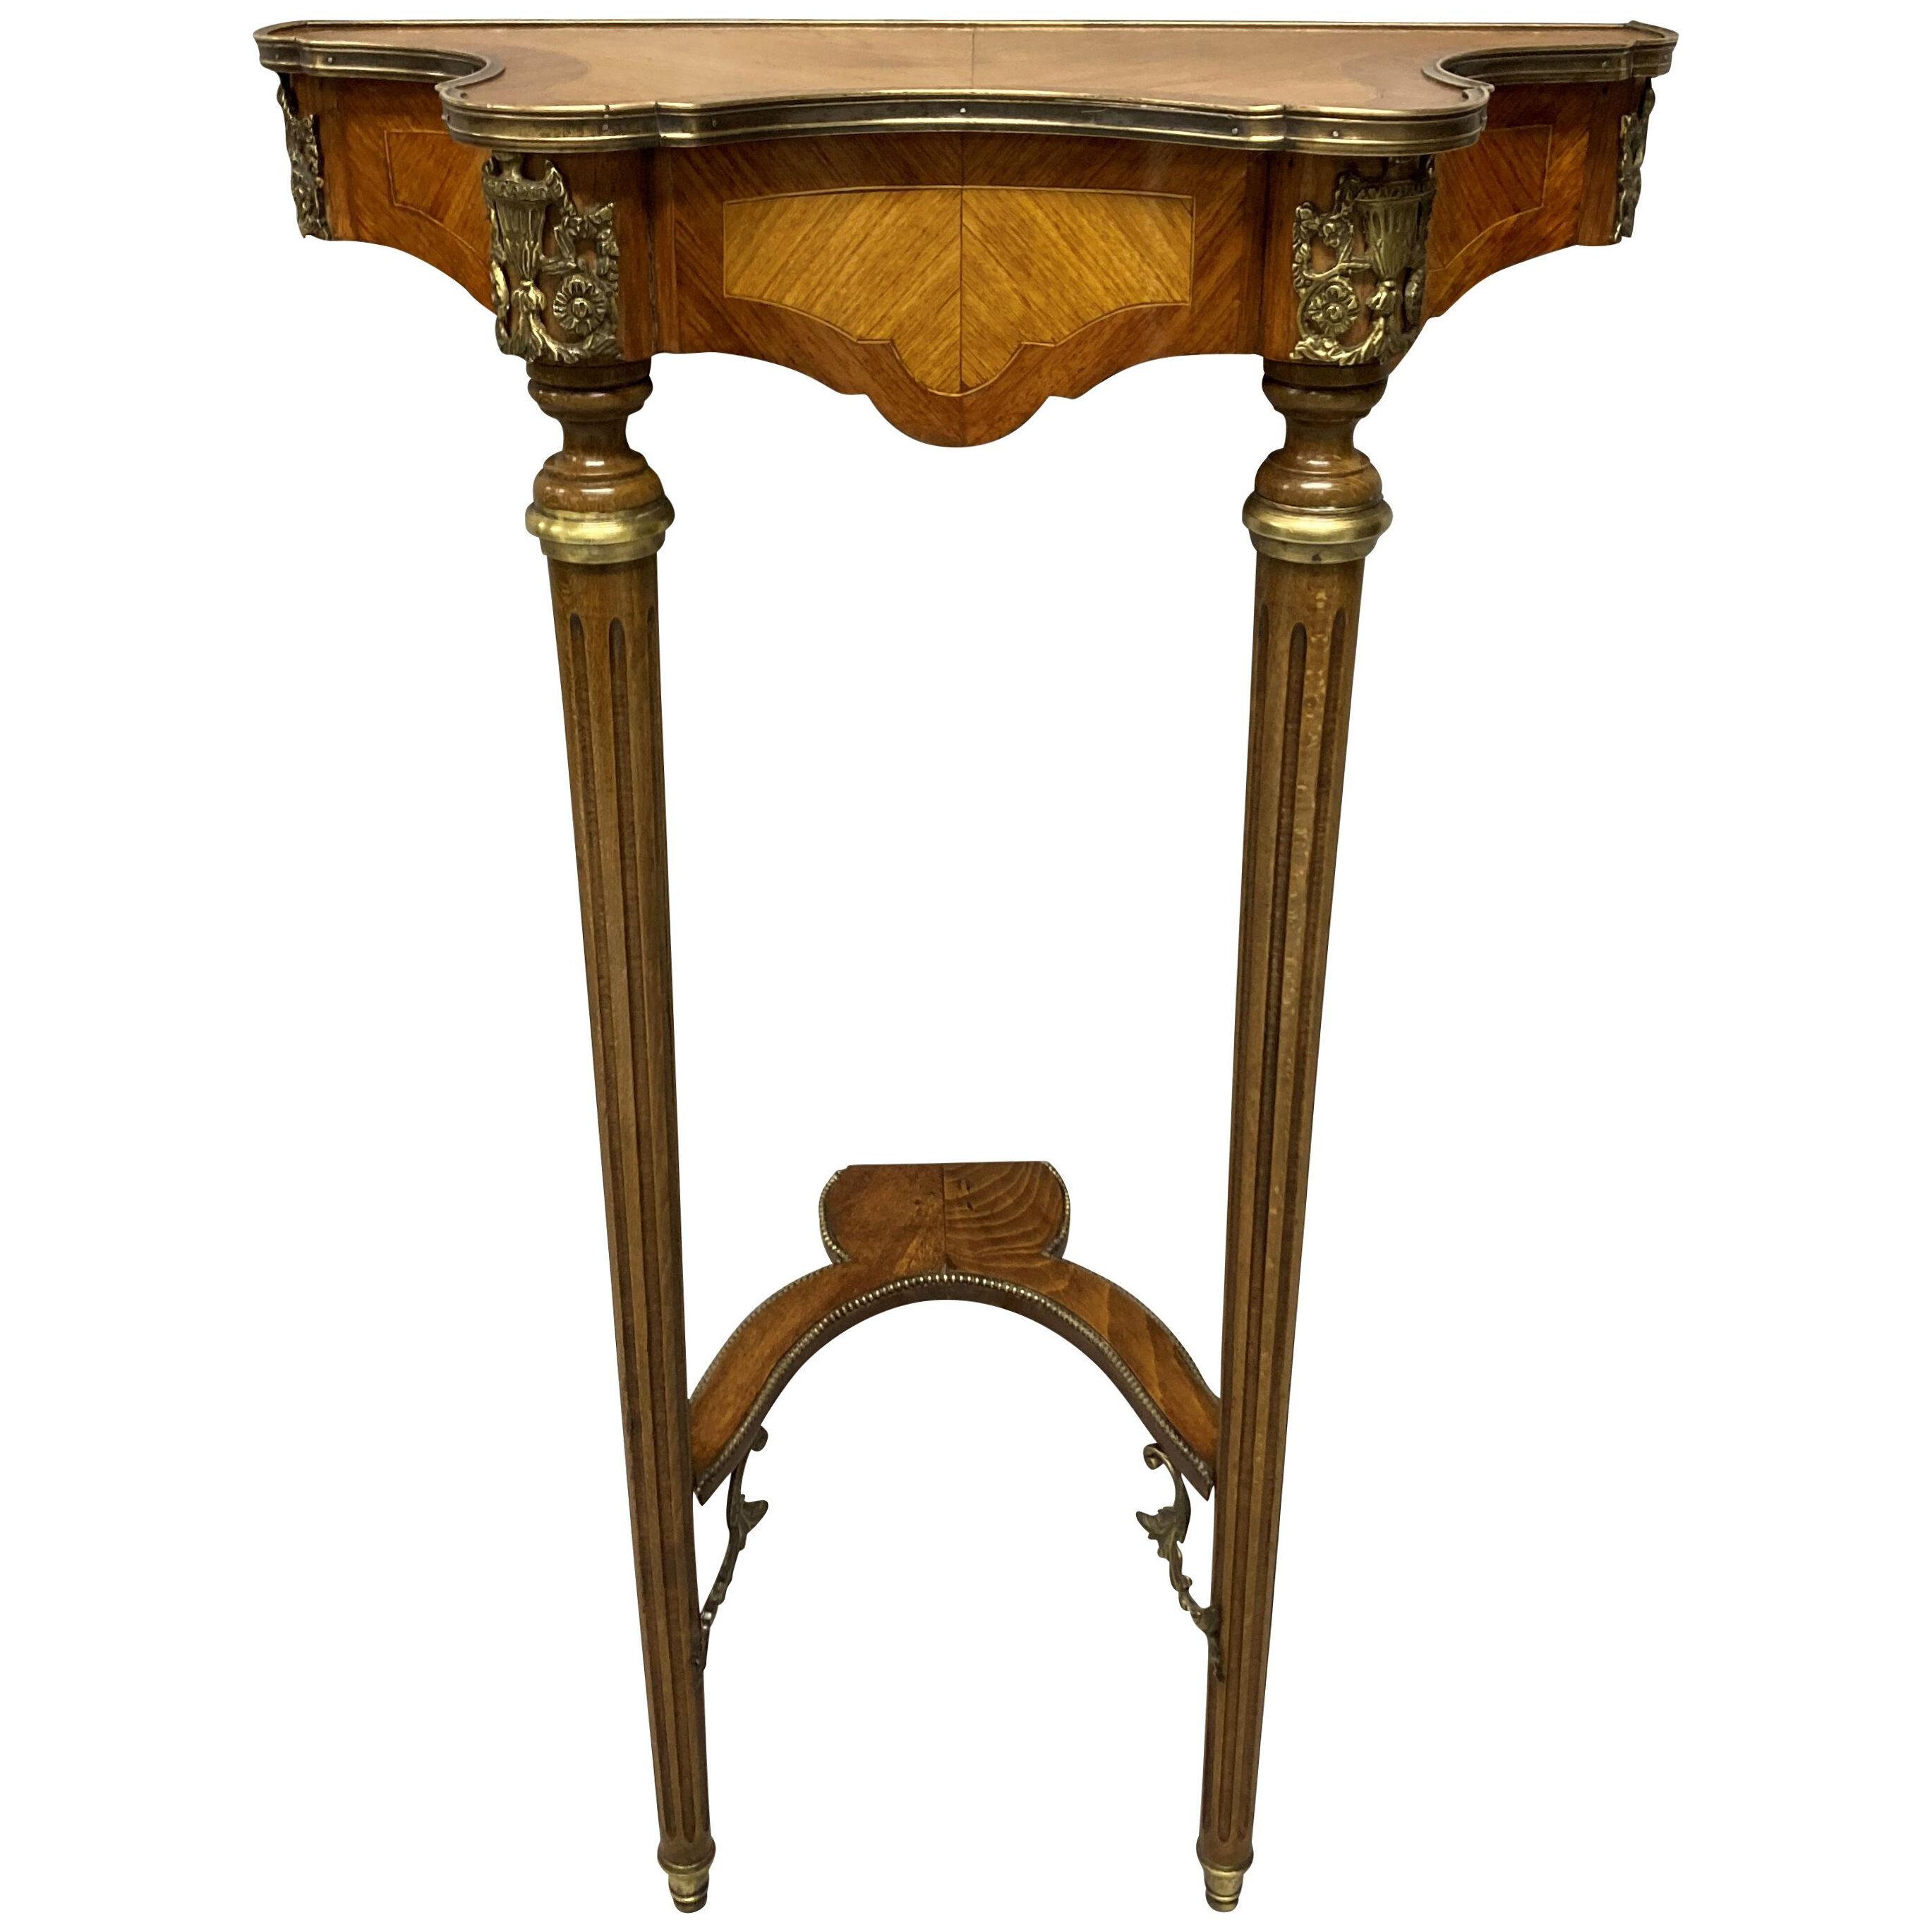 A FRENCH LOUIS XV STYLE KINGWOOD PETITE CONSOLE